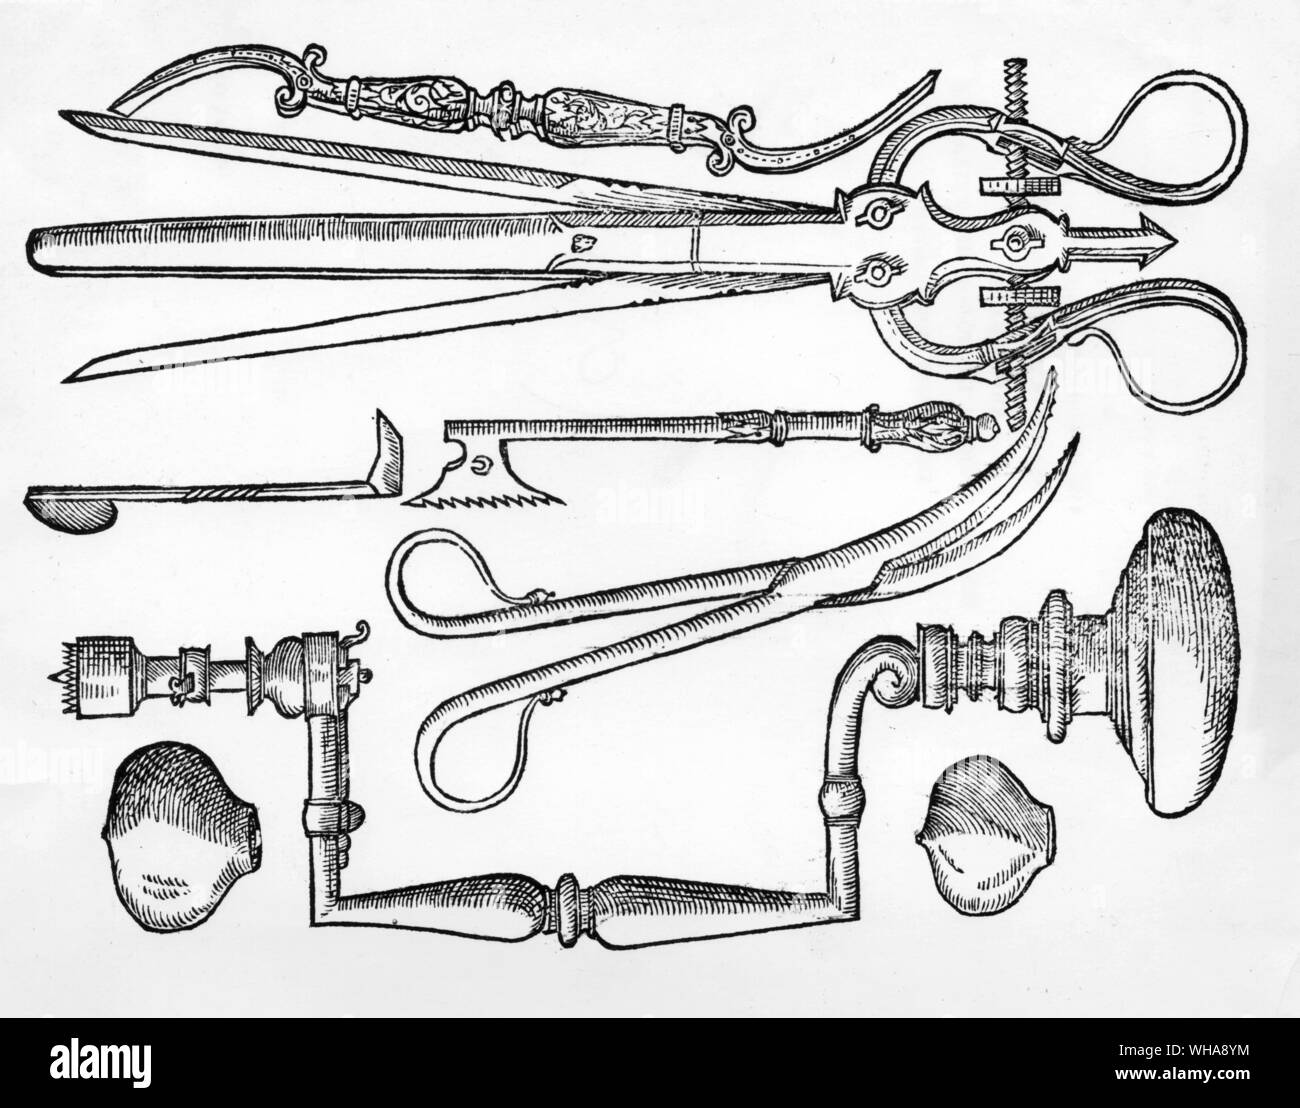 Surgical instruments 16th century. From William Clowes Profitable and necessary book of observations London. 1596 Stock Photo